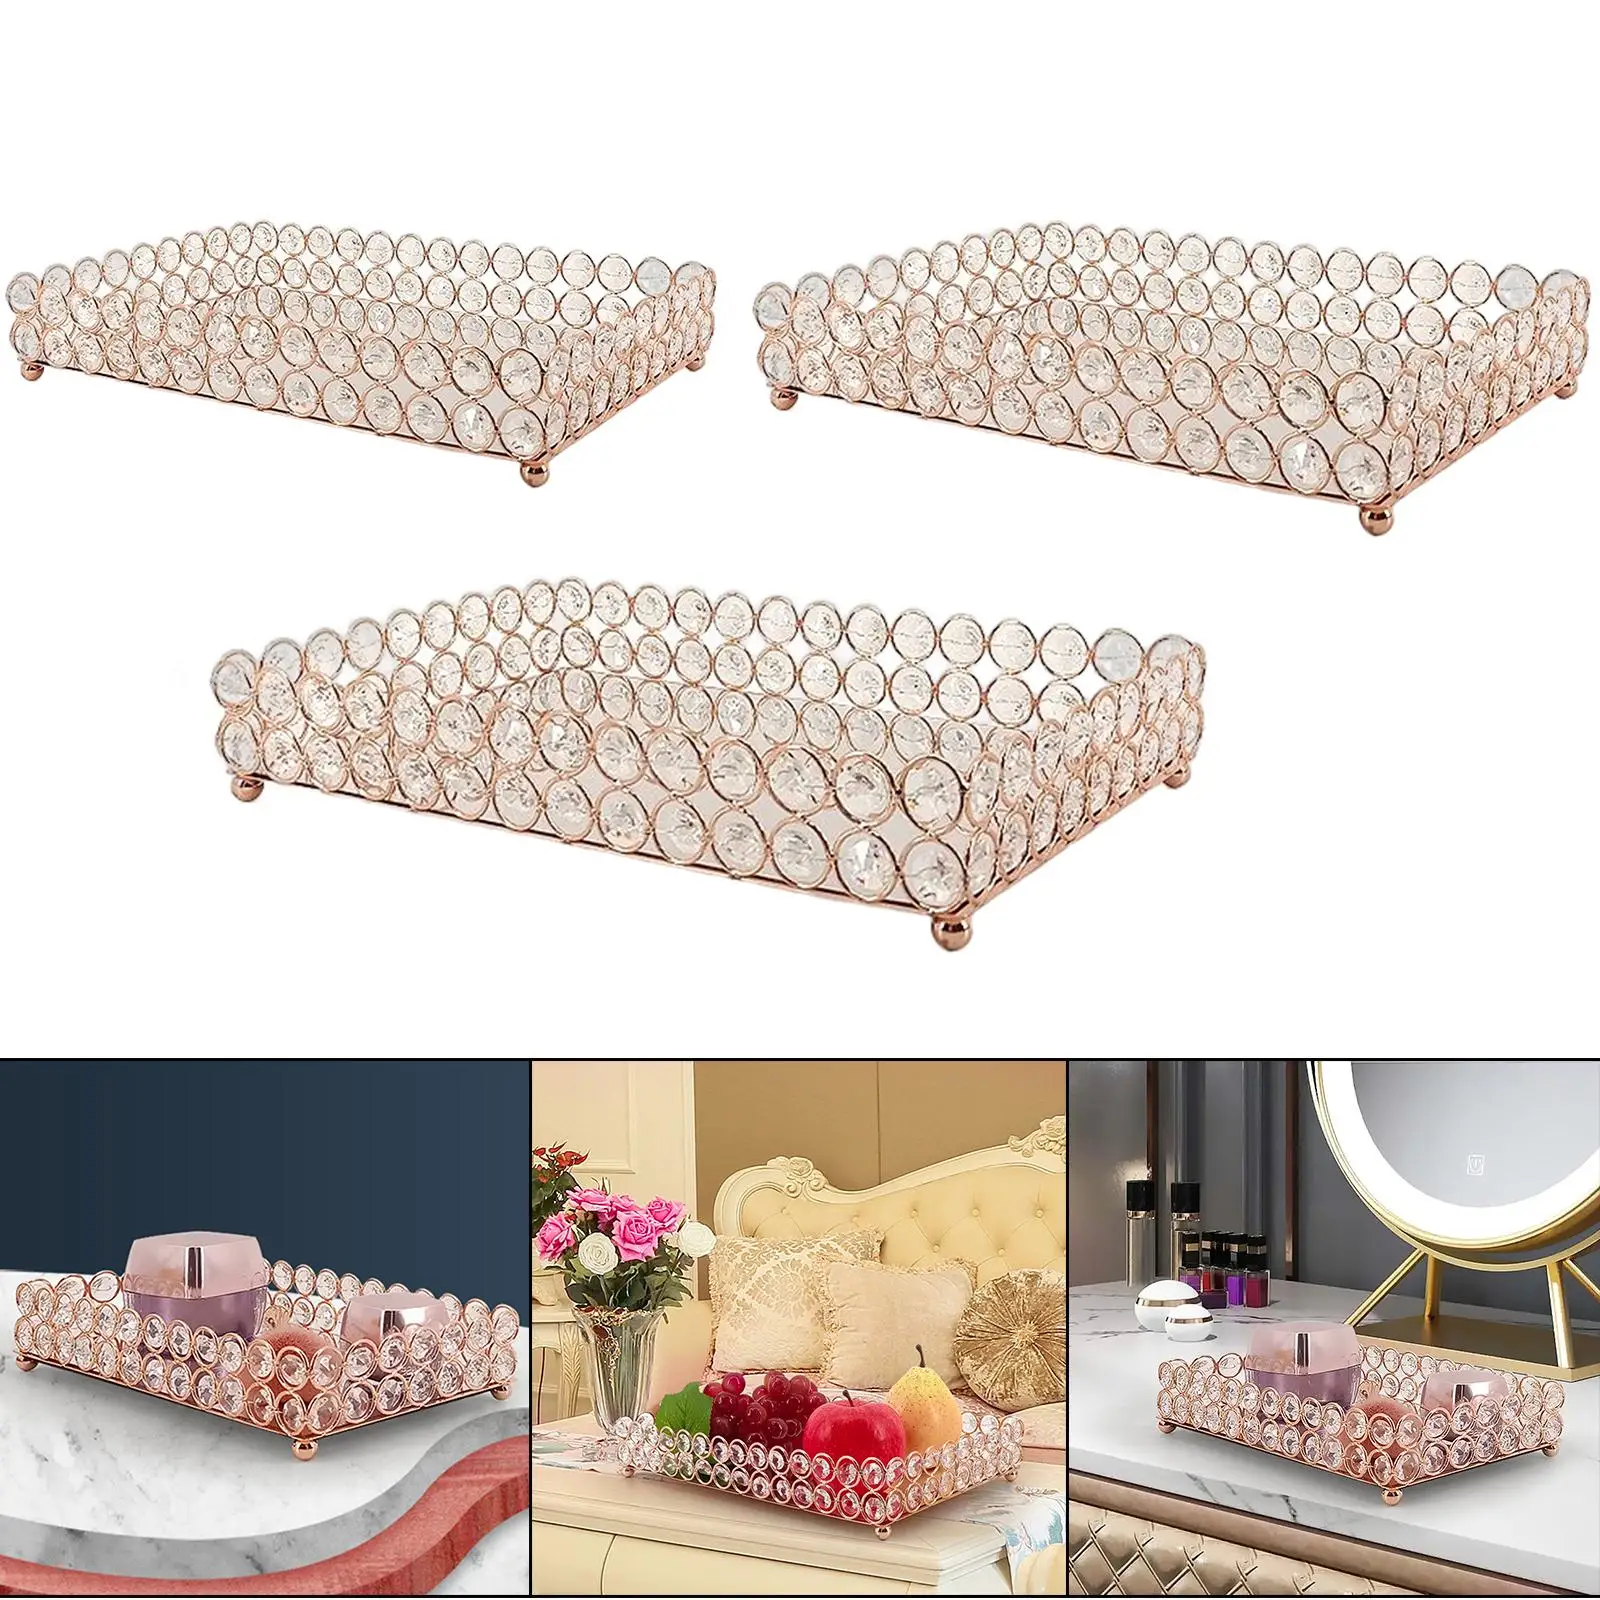 Decorative Mirrored Fruit Tray Panel Retro Crystal Organizer Vanity Tray Display Panel for Wedding Office Dresser Wine Candles